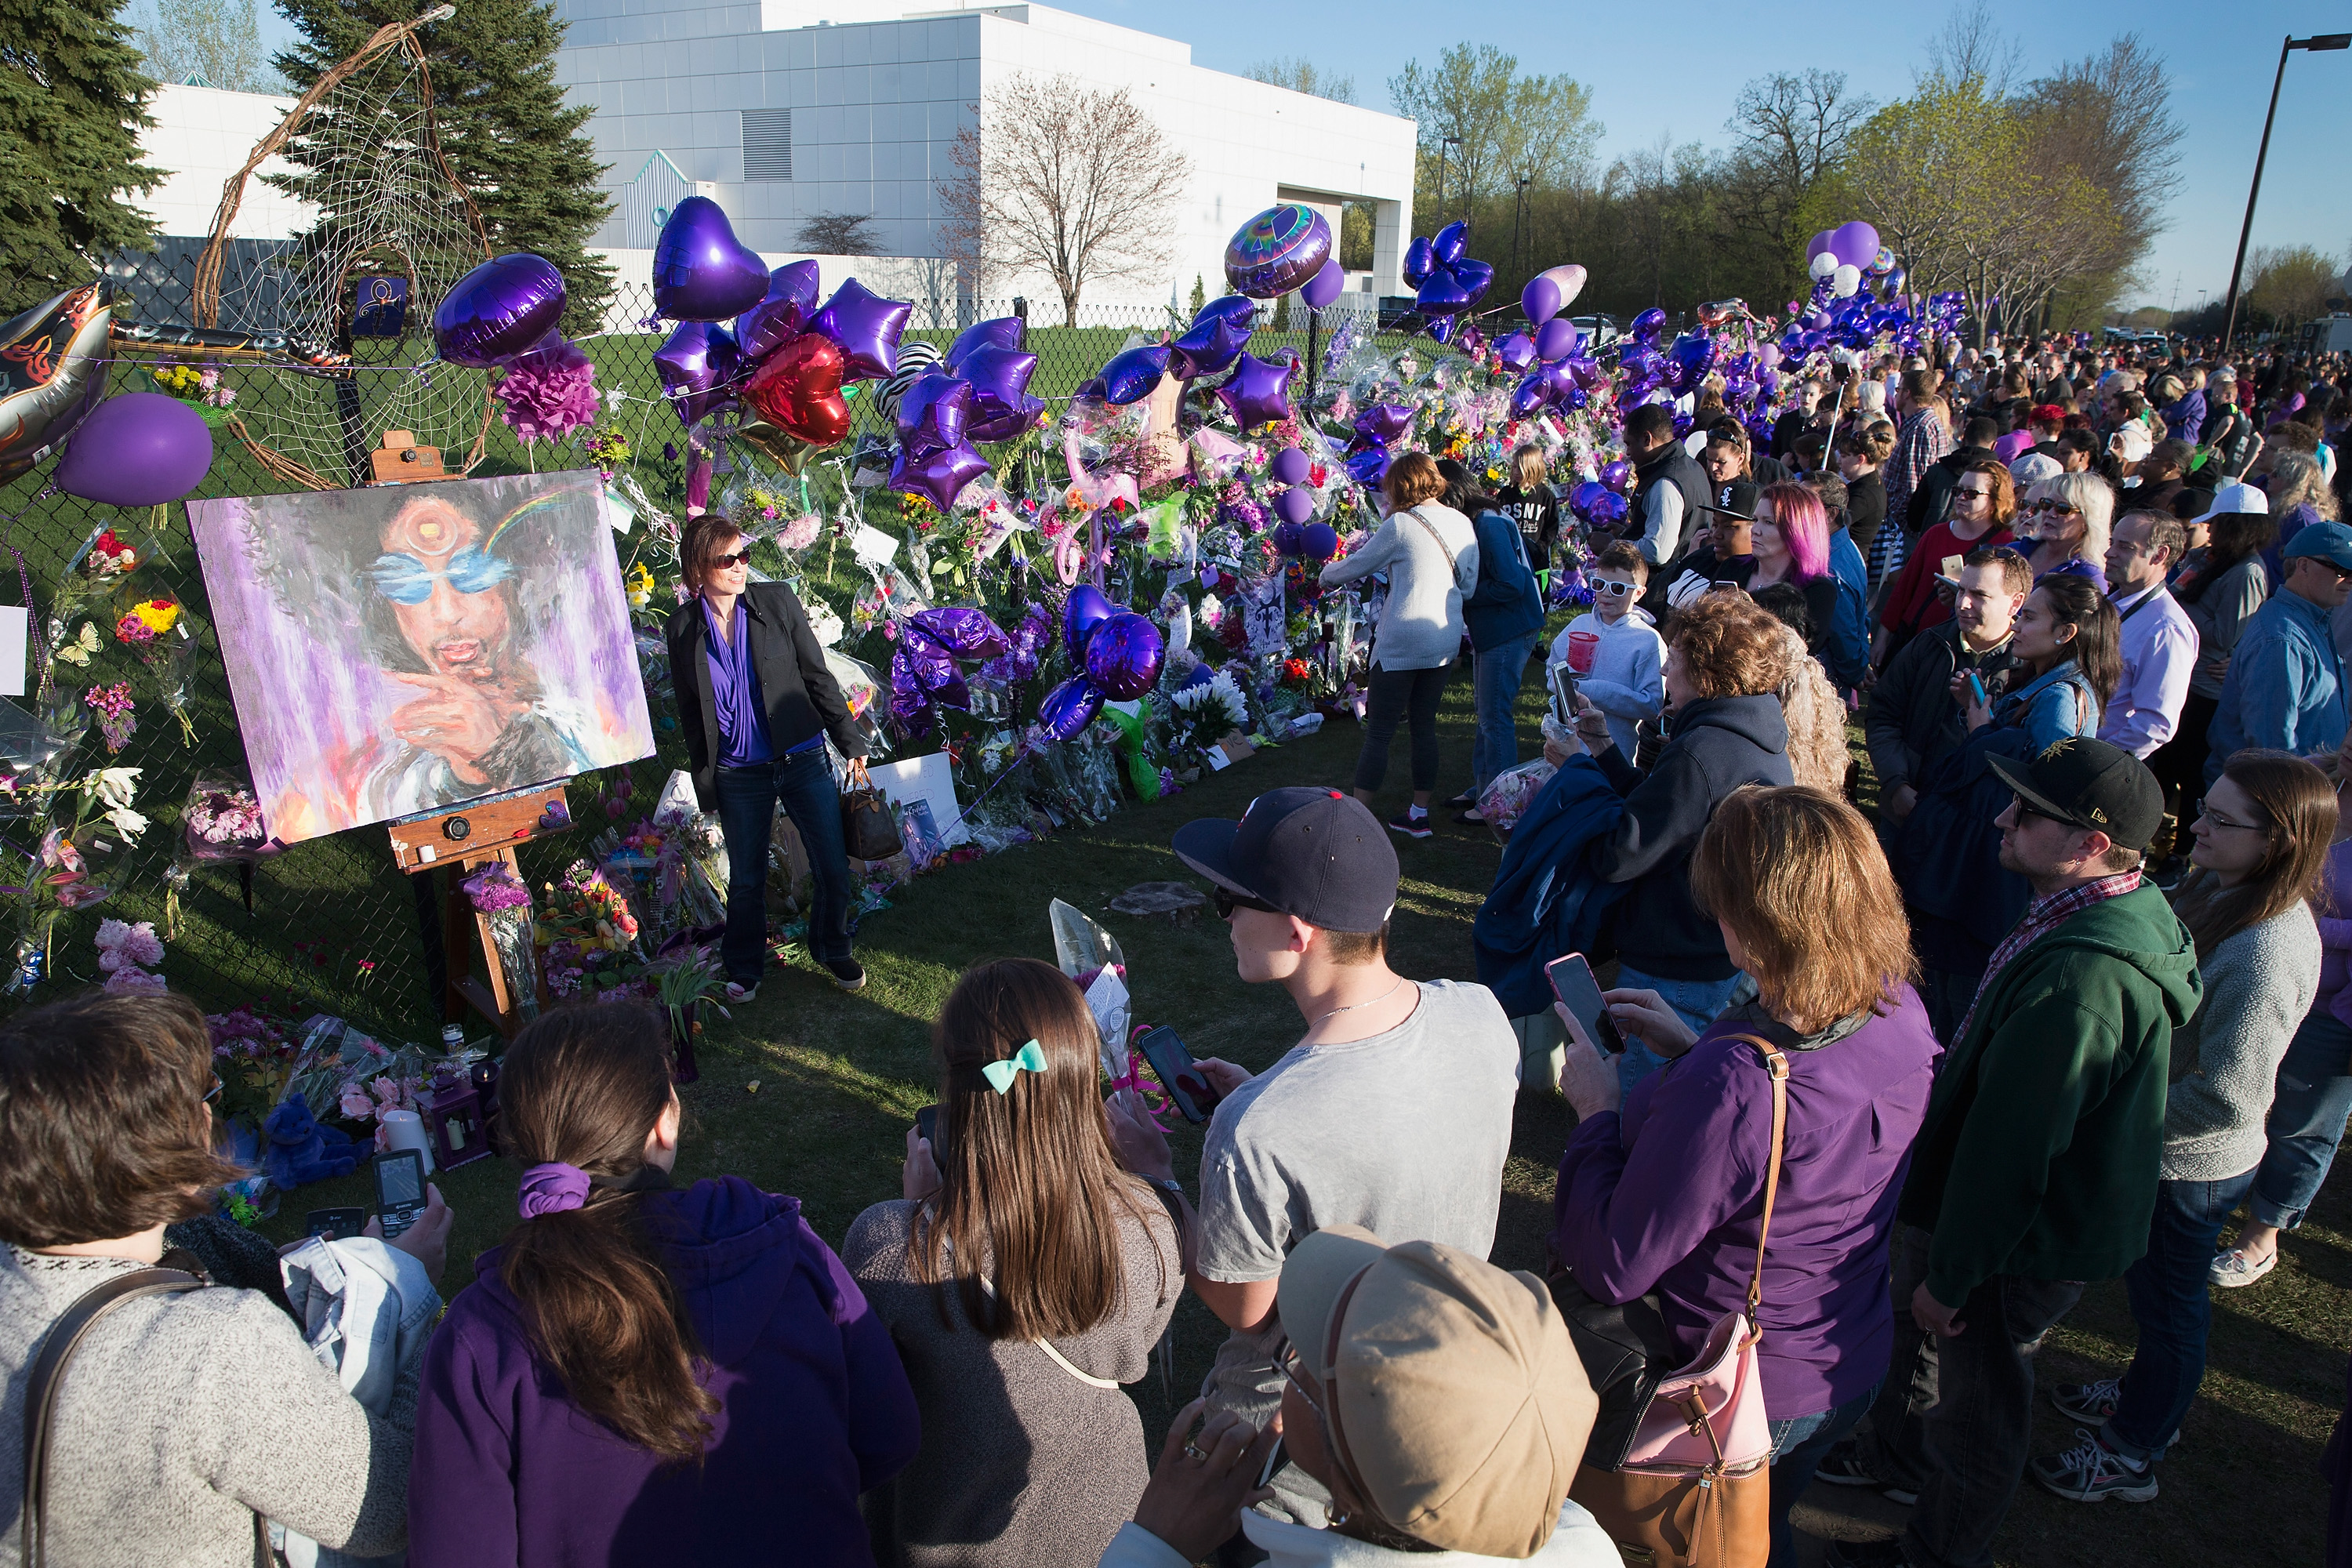 Mourning fans visit a memorial outside Paisley Park, the home and studio of the late Prince, on April 22, 2016 in Chanhassen, Minnesota | Source: Getty Images